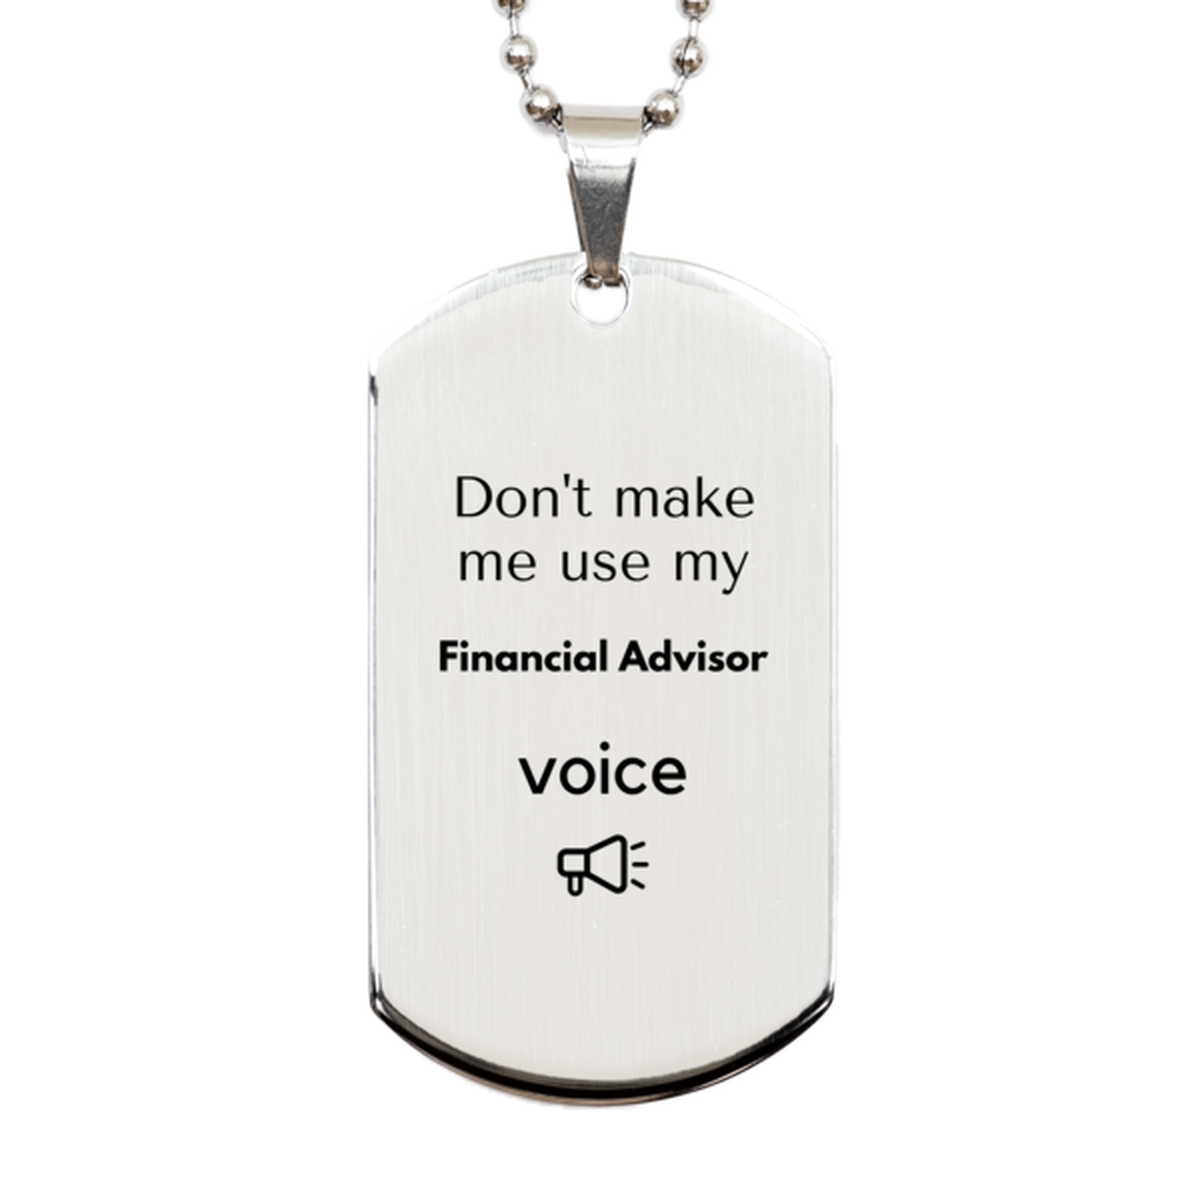 Don't make me use my Financial Advisor voice, Sarcasm Financial Advisor Gifts, Christmas Financial Advisor Silver Dog Tag Birthday Unique Gifts For Financial Advisor Coworkers, Men, Women, Colleague, Friends